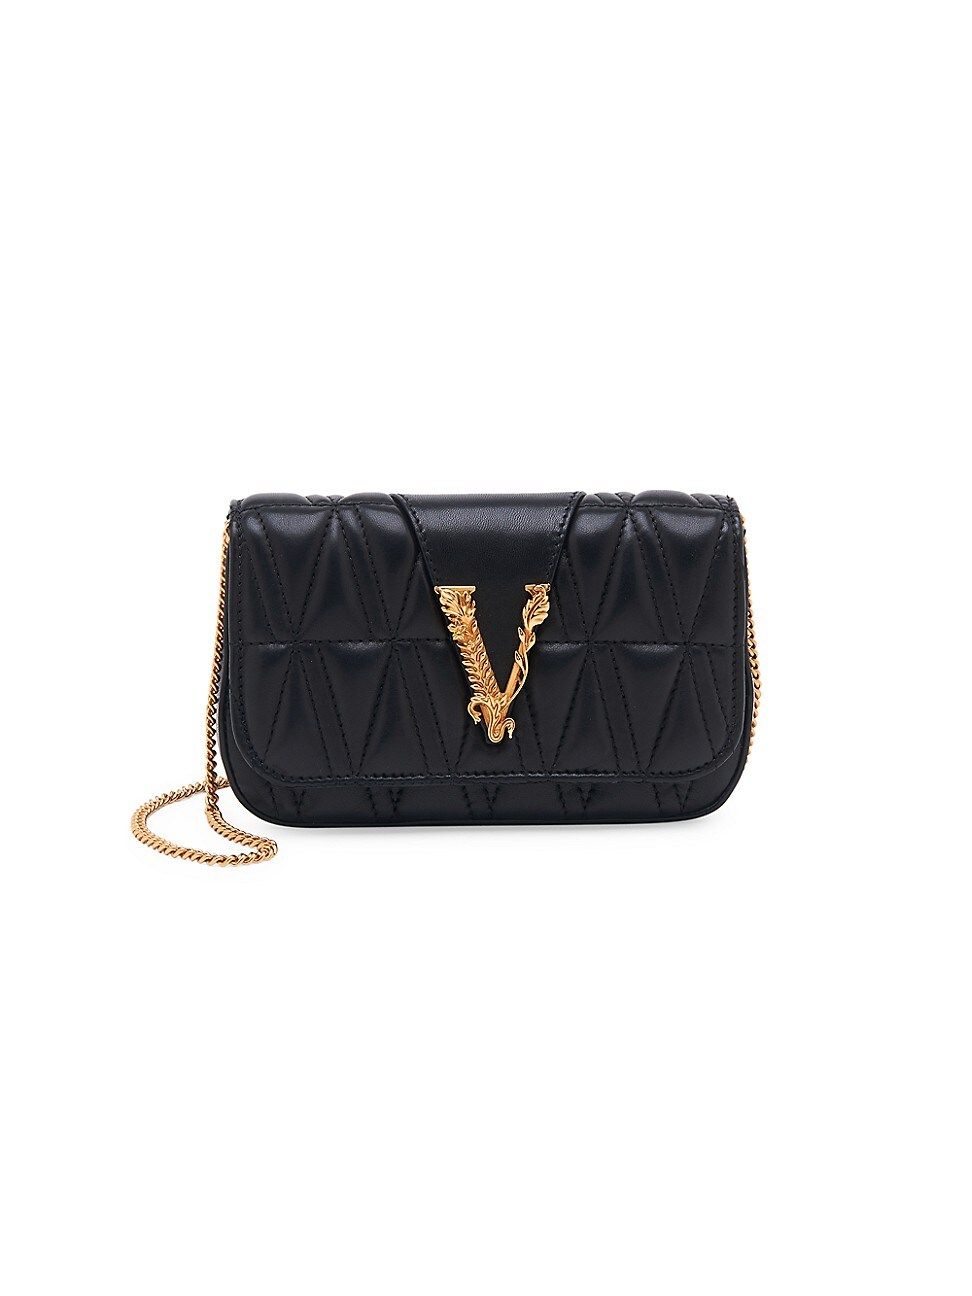 Versace Women's Small Virtus Quilted Leather Clutch - Black | Saks Fifth Avenue